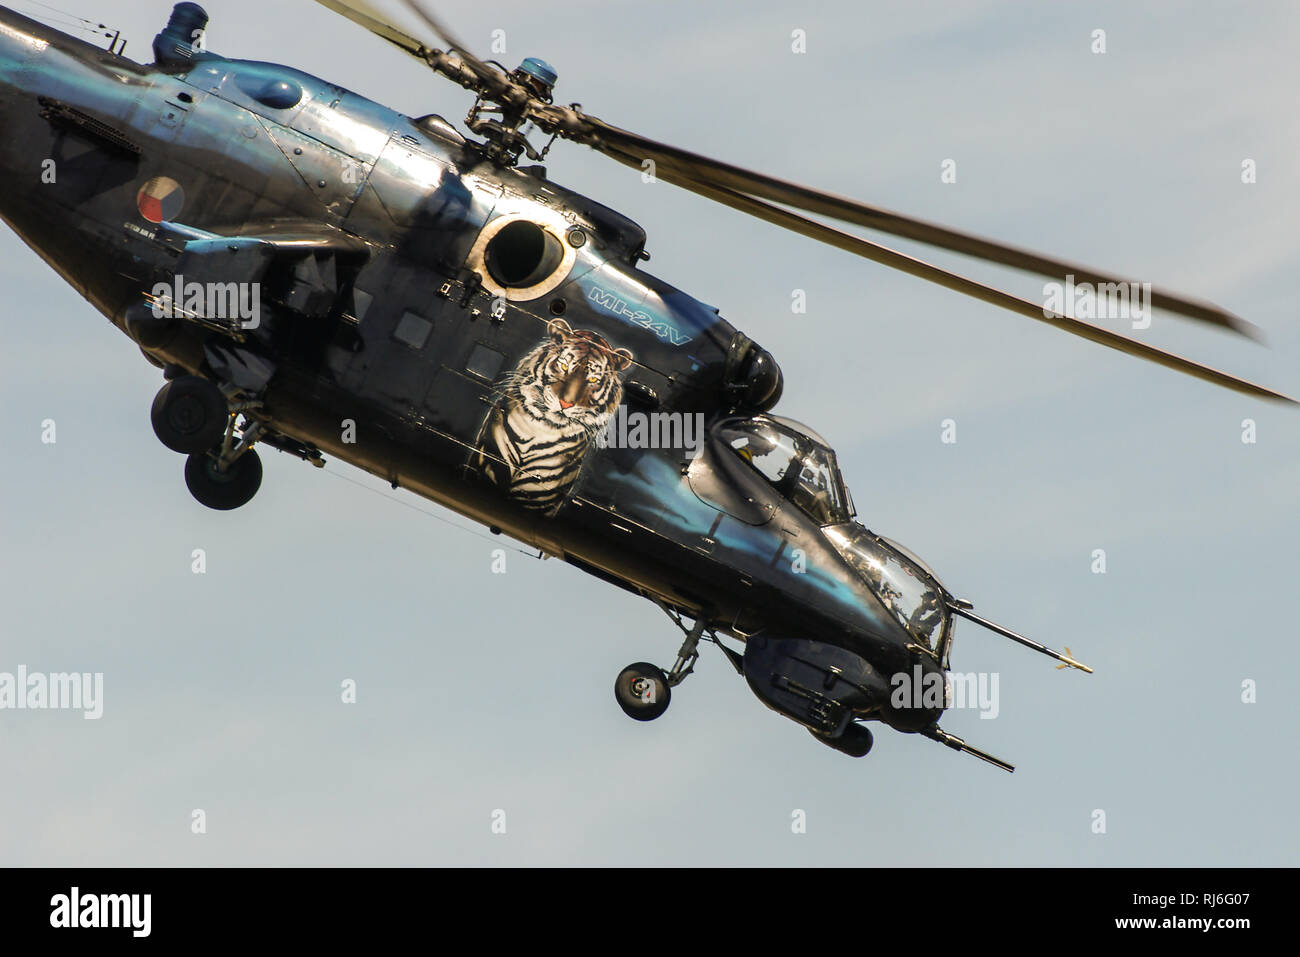 Czech AF Mil Mi-24 (NATO reporting name Hind) is a large helicopter gunship, attack helicopter and troop transport. Russian Soviet era. Tiger scheme Stock Photo